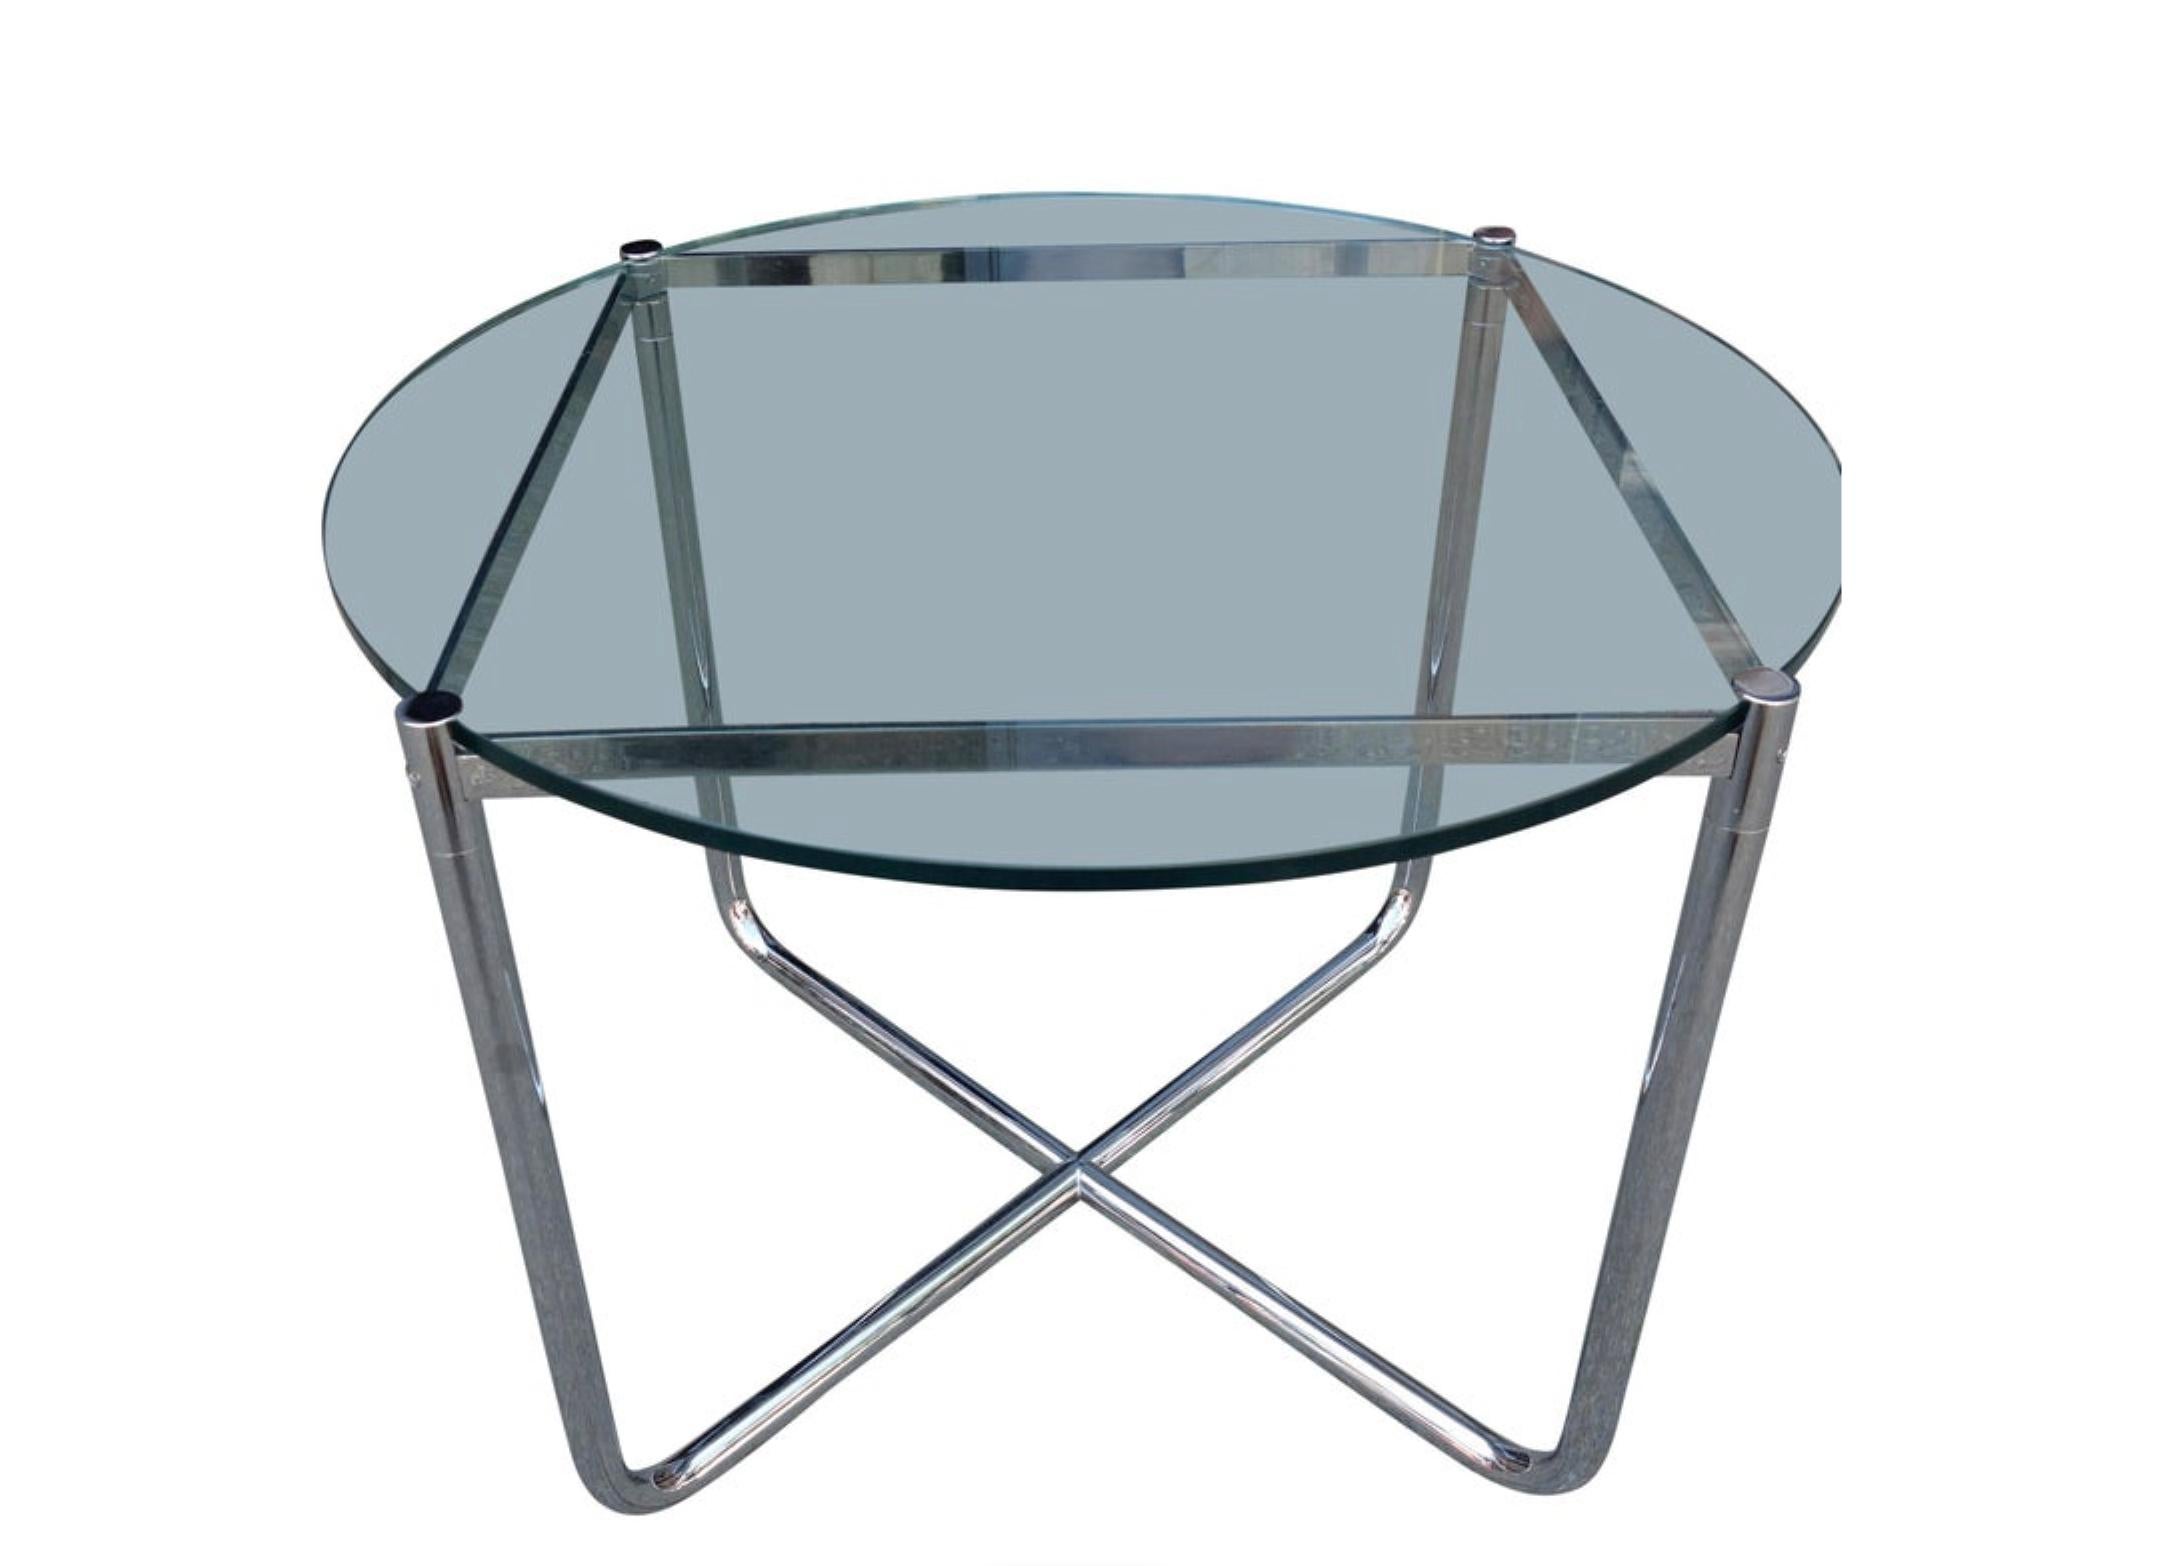 For your consideration are these beautiful heavy chromed round side tables fitting perfectly with the Barcelona lounge chairs. Featuring a thick glass top and bent tube frame. The top can be removed from the frame for easier moving. The width is 28